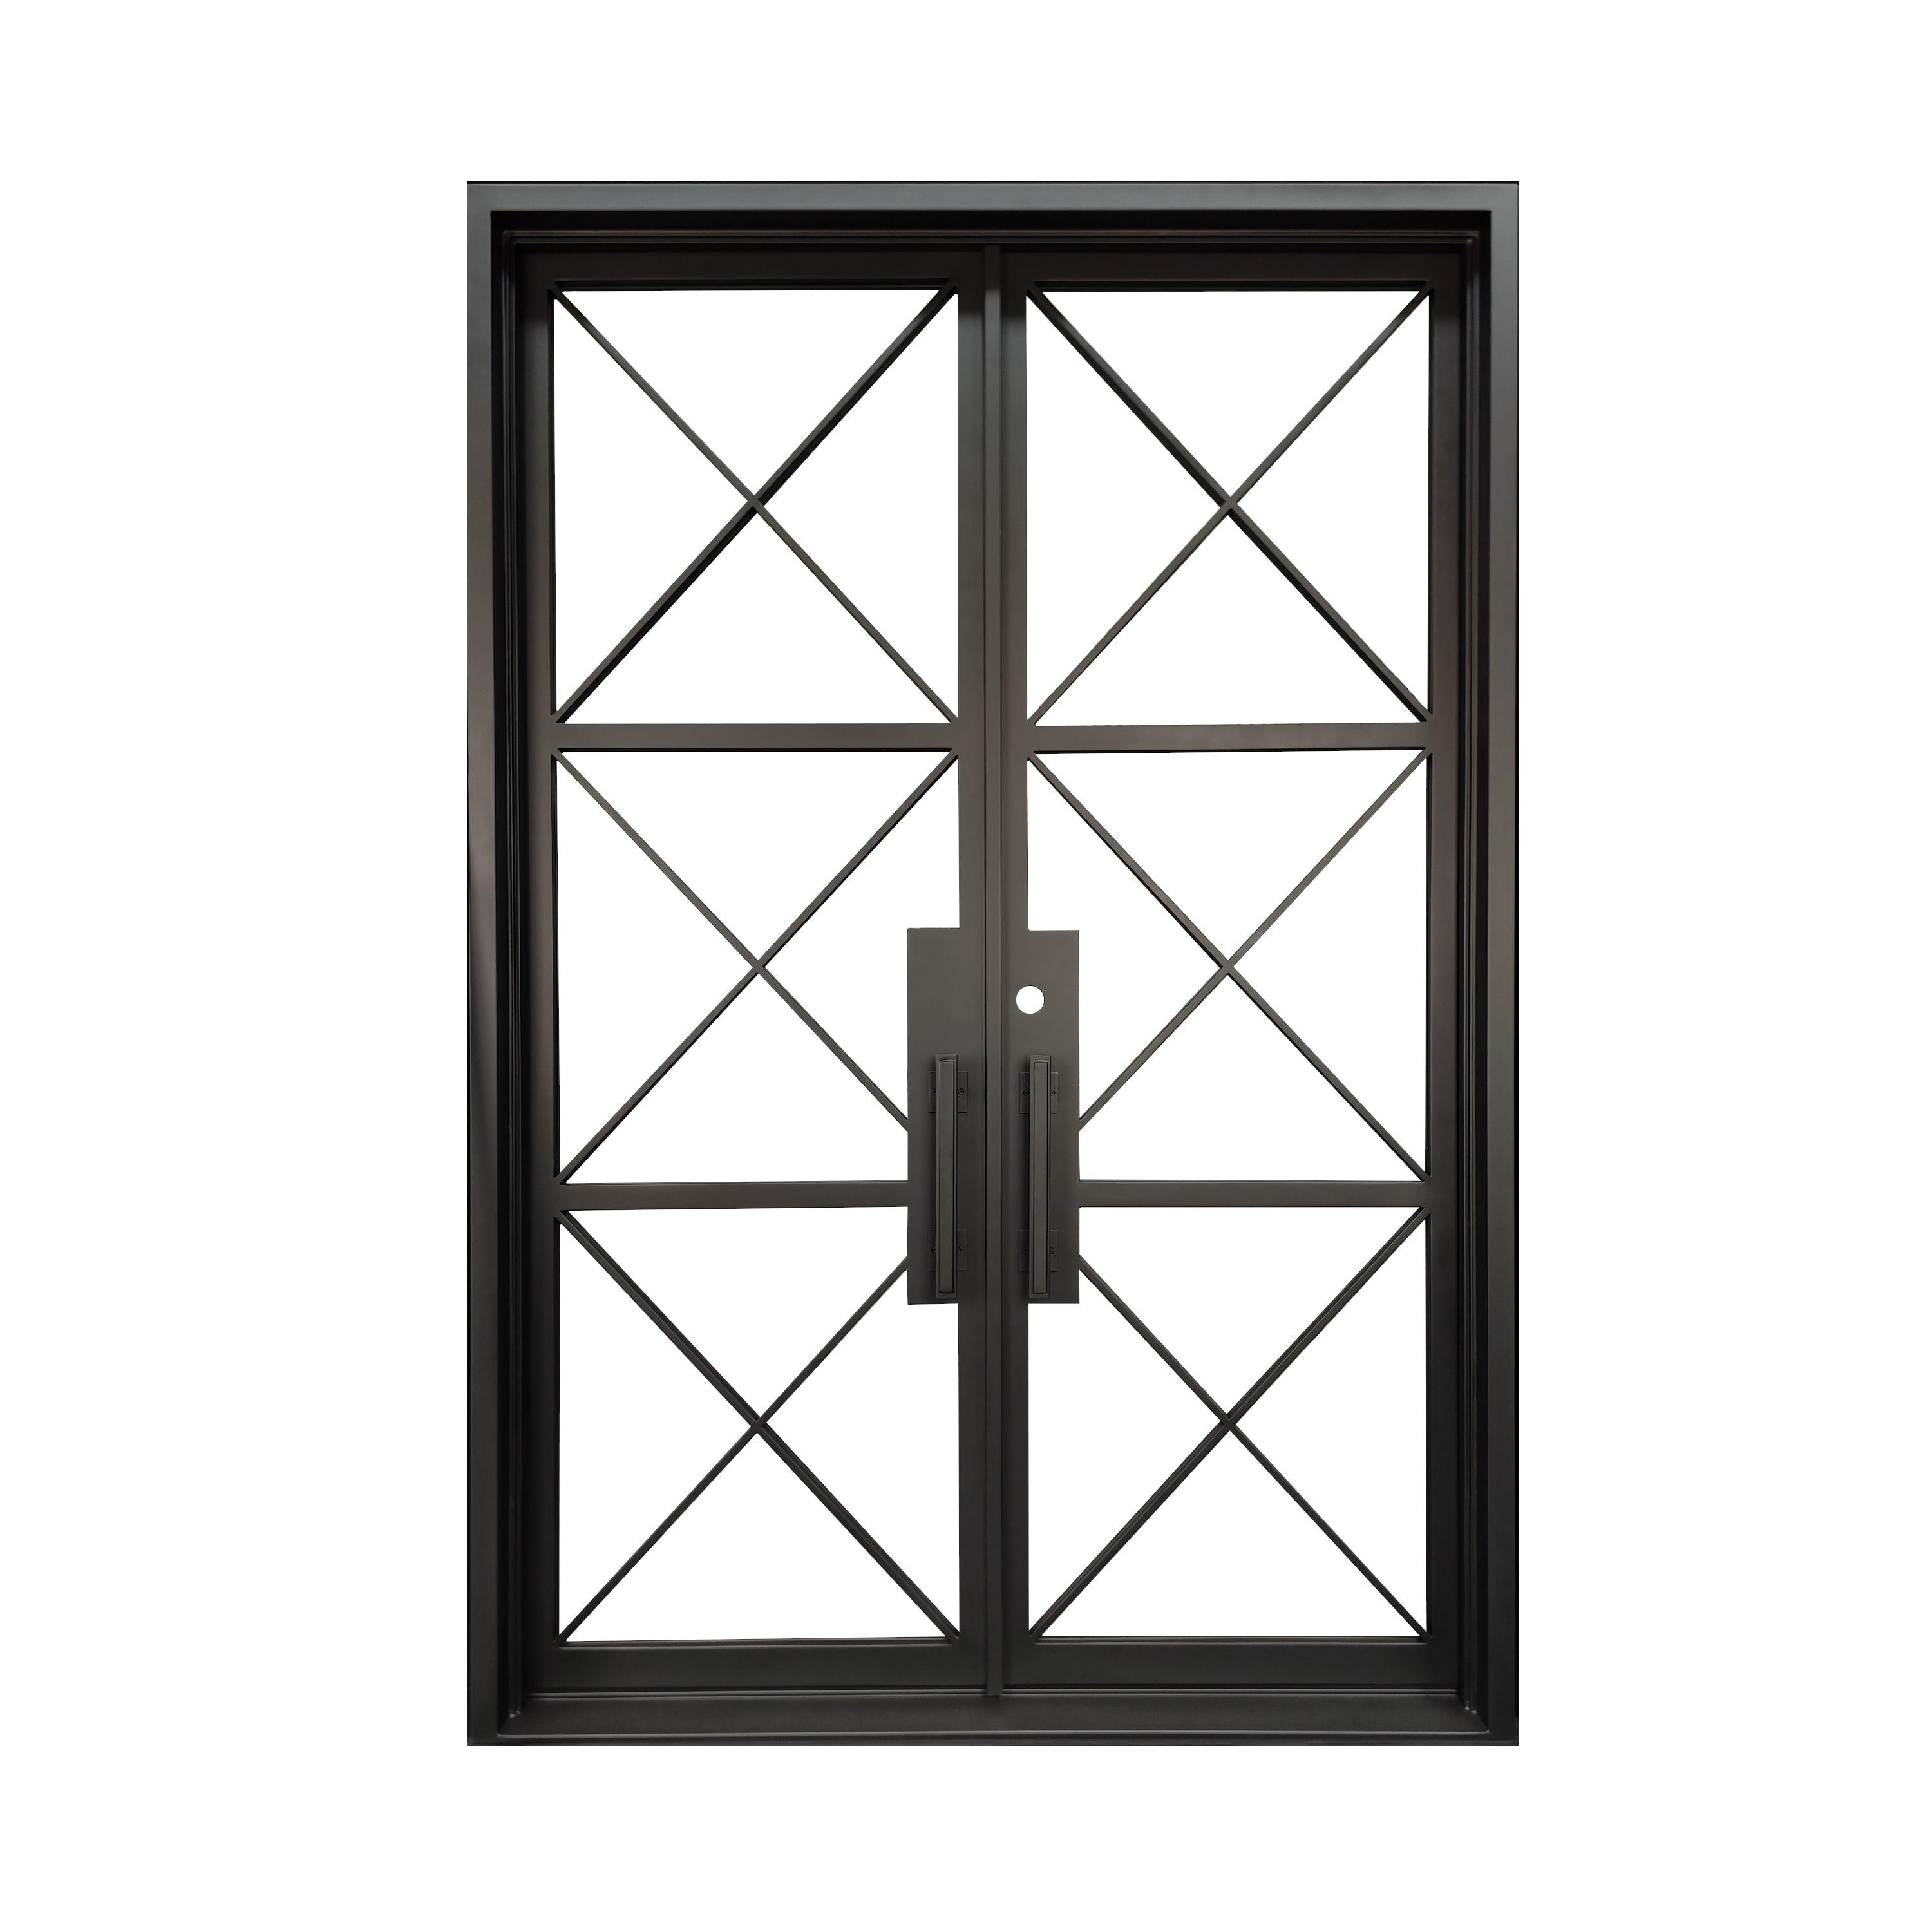 Prosper Model Double Front Entry Iron Door With Tempered Low E Clear Glass Matt Black Finish